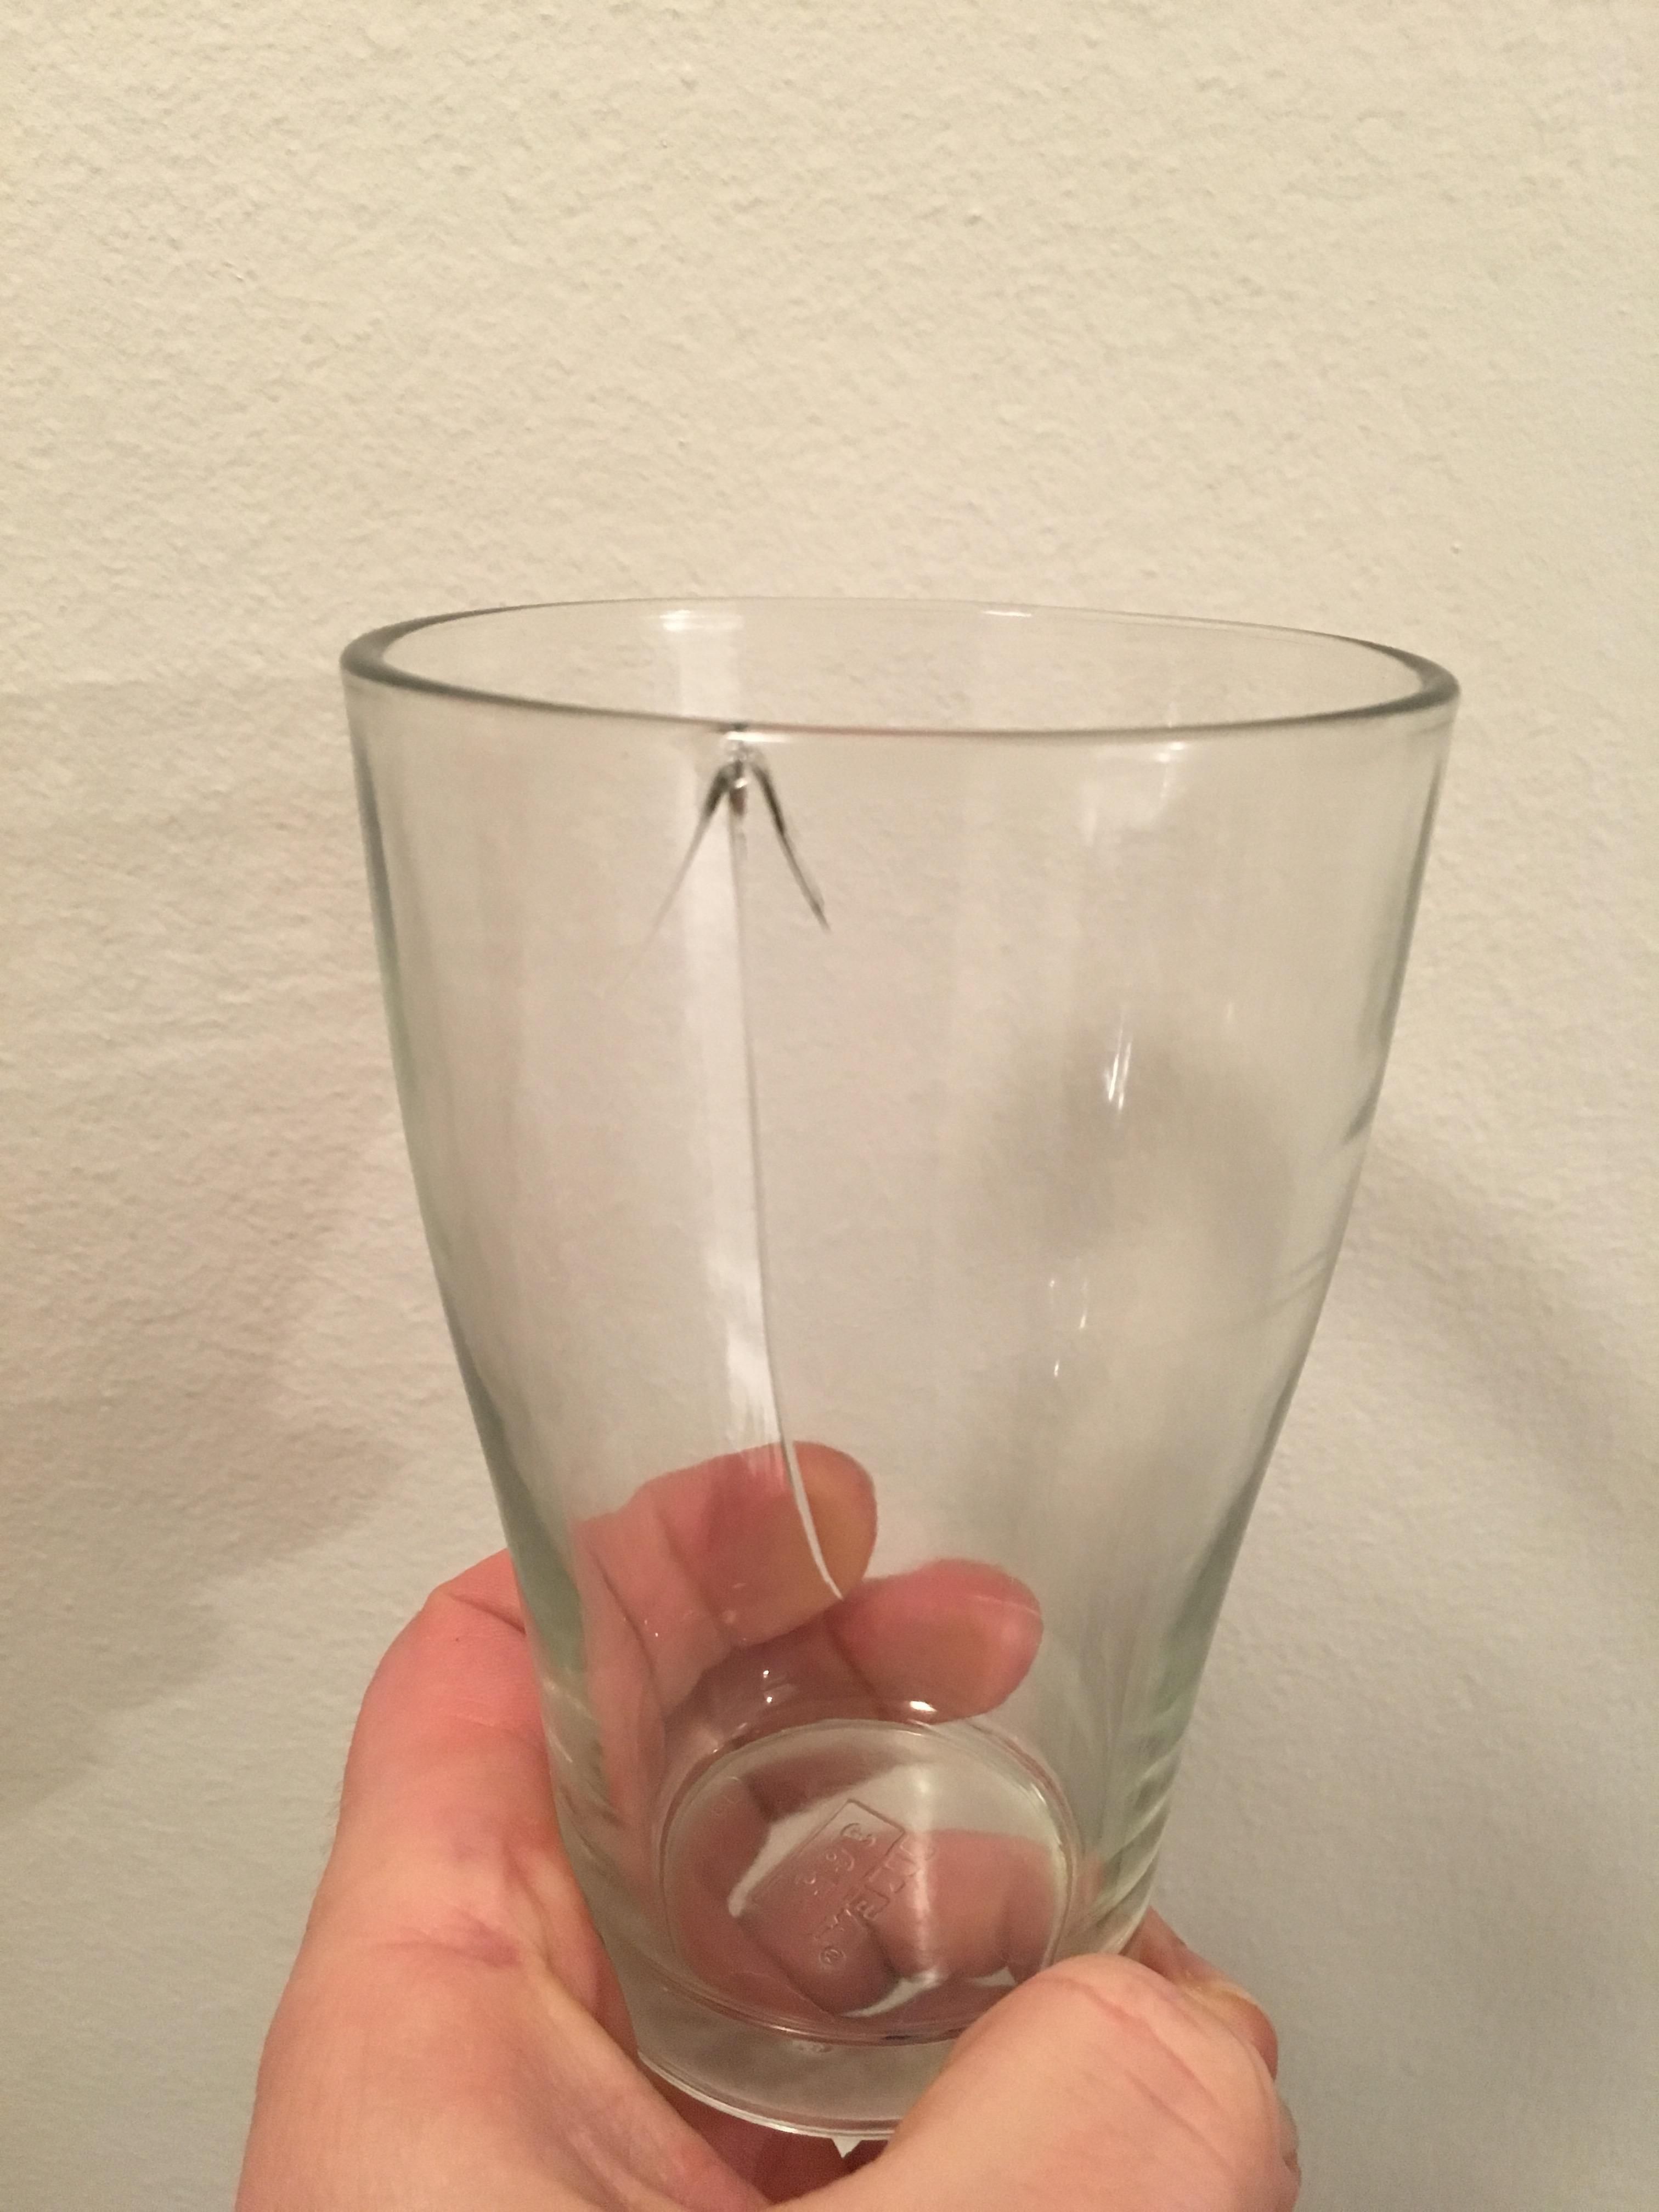 Dropped a glass while doing the dishes and it showed me the point of impact.